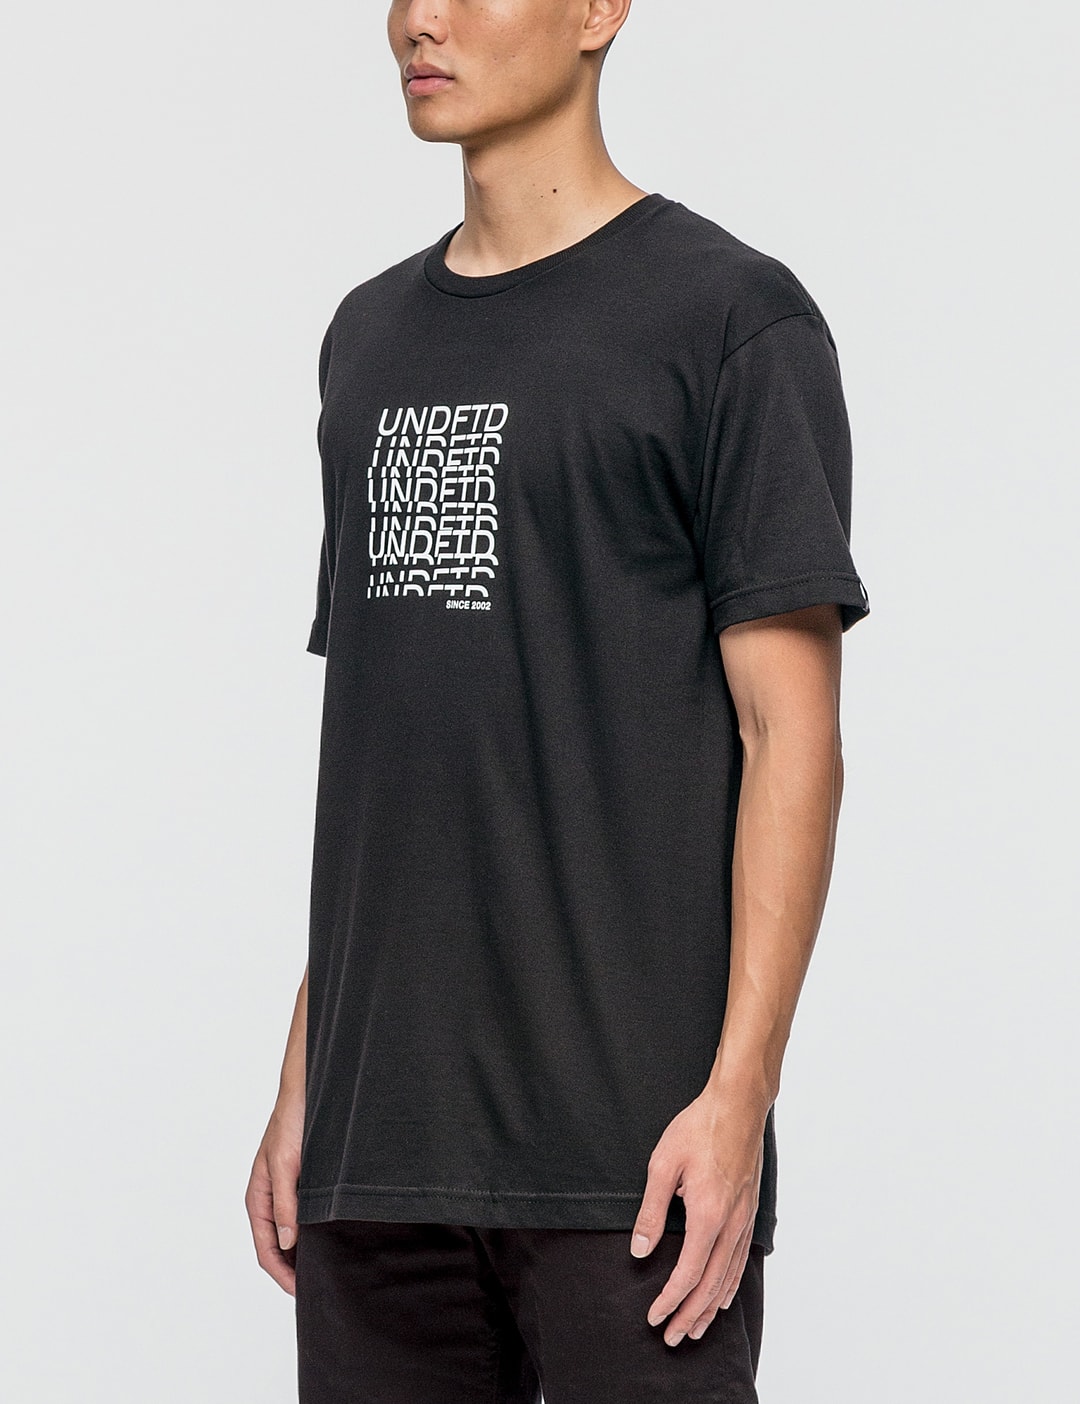 Undefeated - Undercut T-Shirt | HBX - Globally Curated Fashion and ...